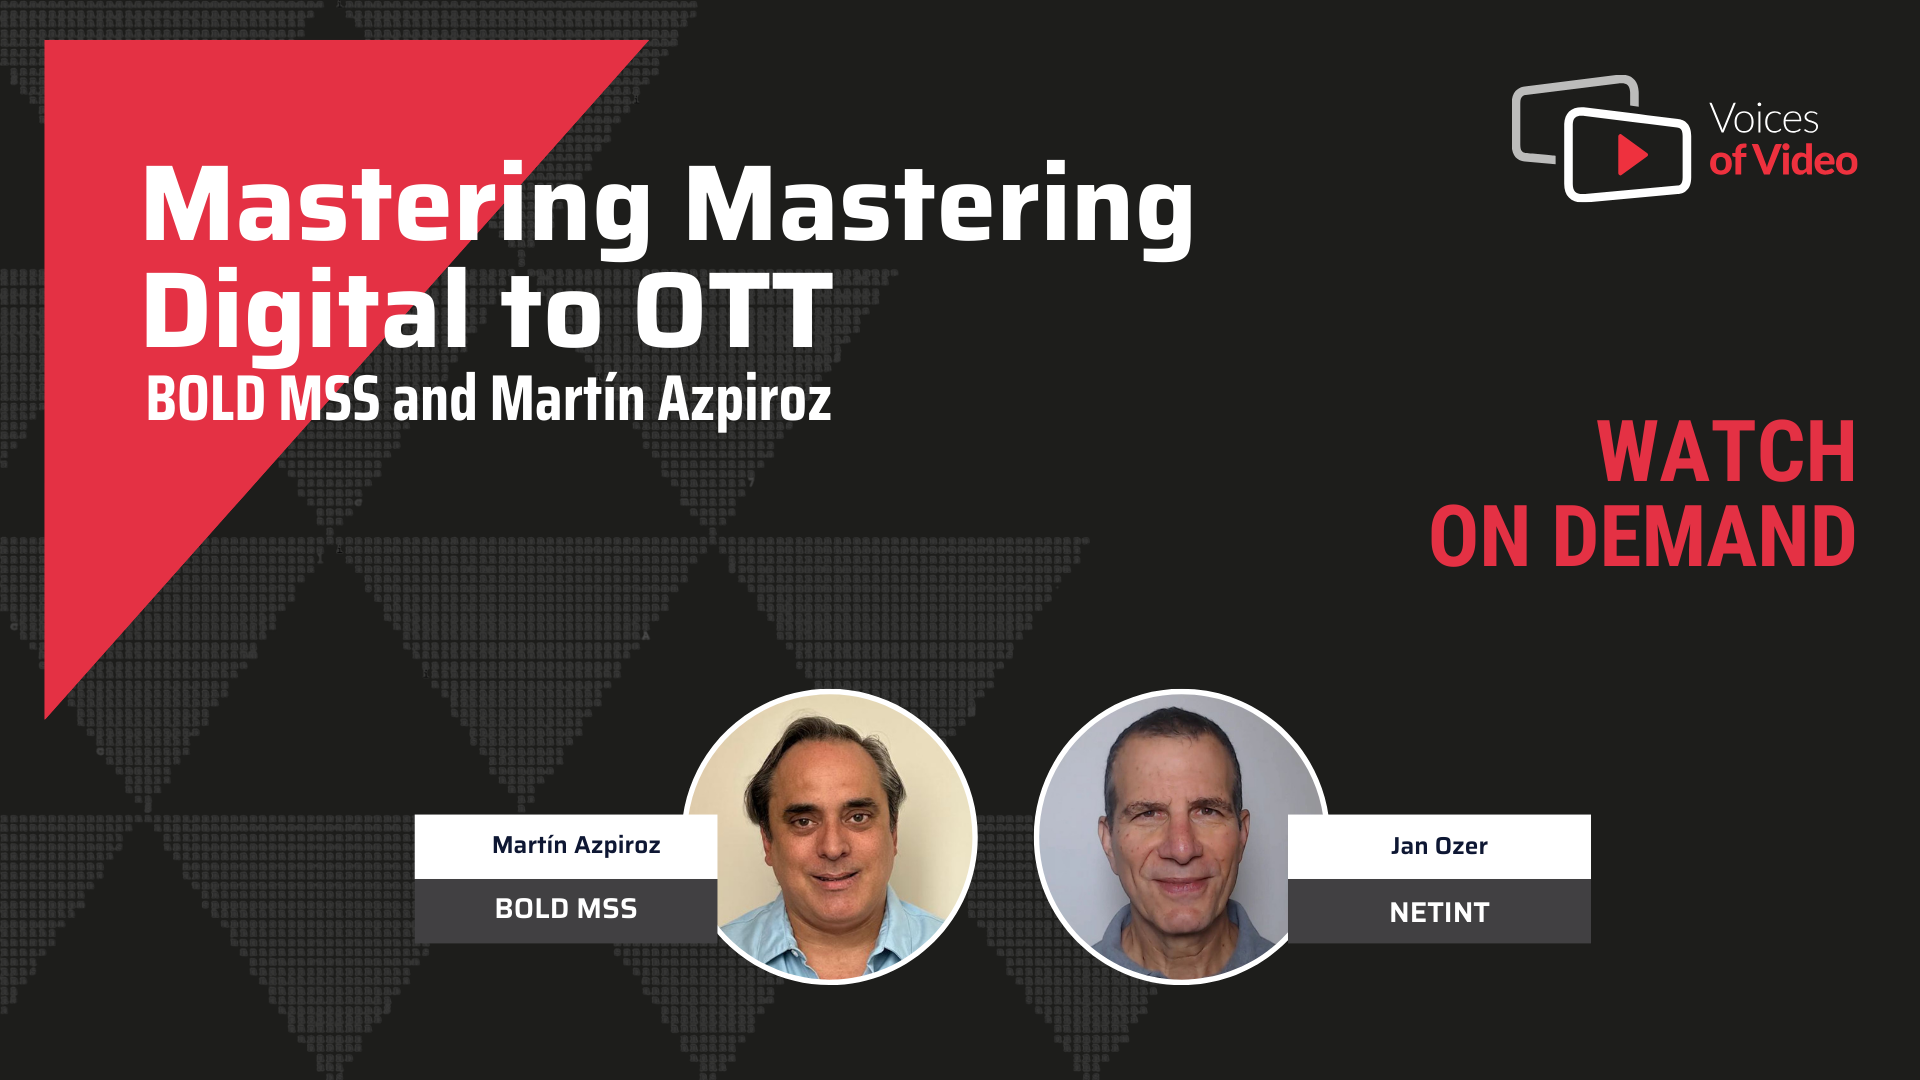 Voices of Video - Mastering Digital to OTT Content Conversion - BOLD MSS and Martín Azpiroz